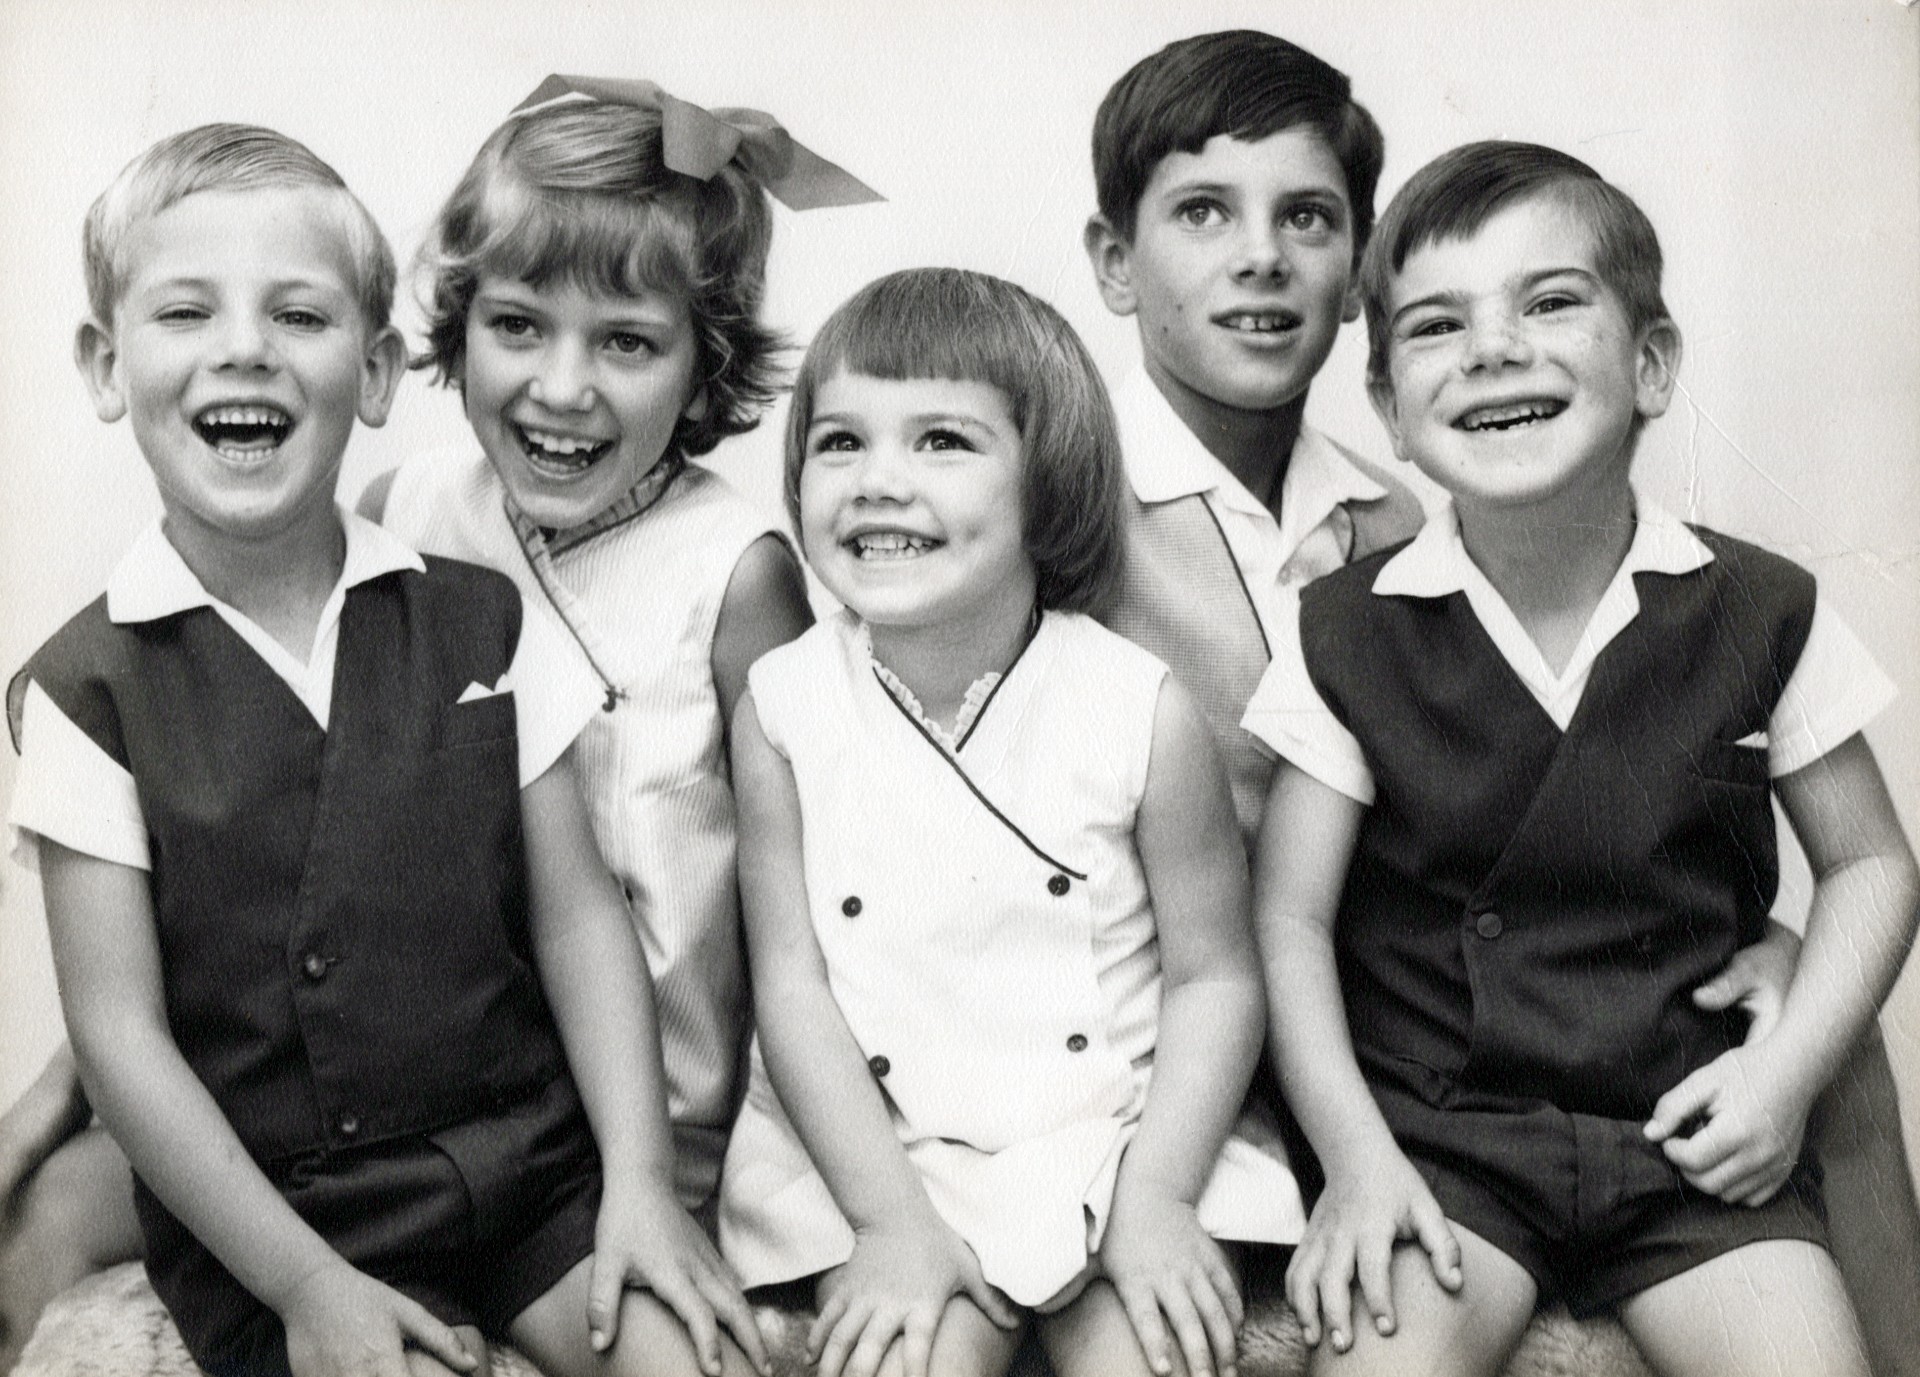 A black and white photo of five young children: two girls and three boys.